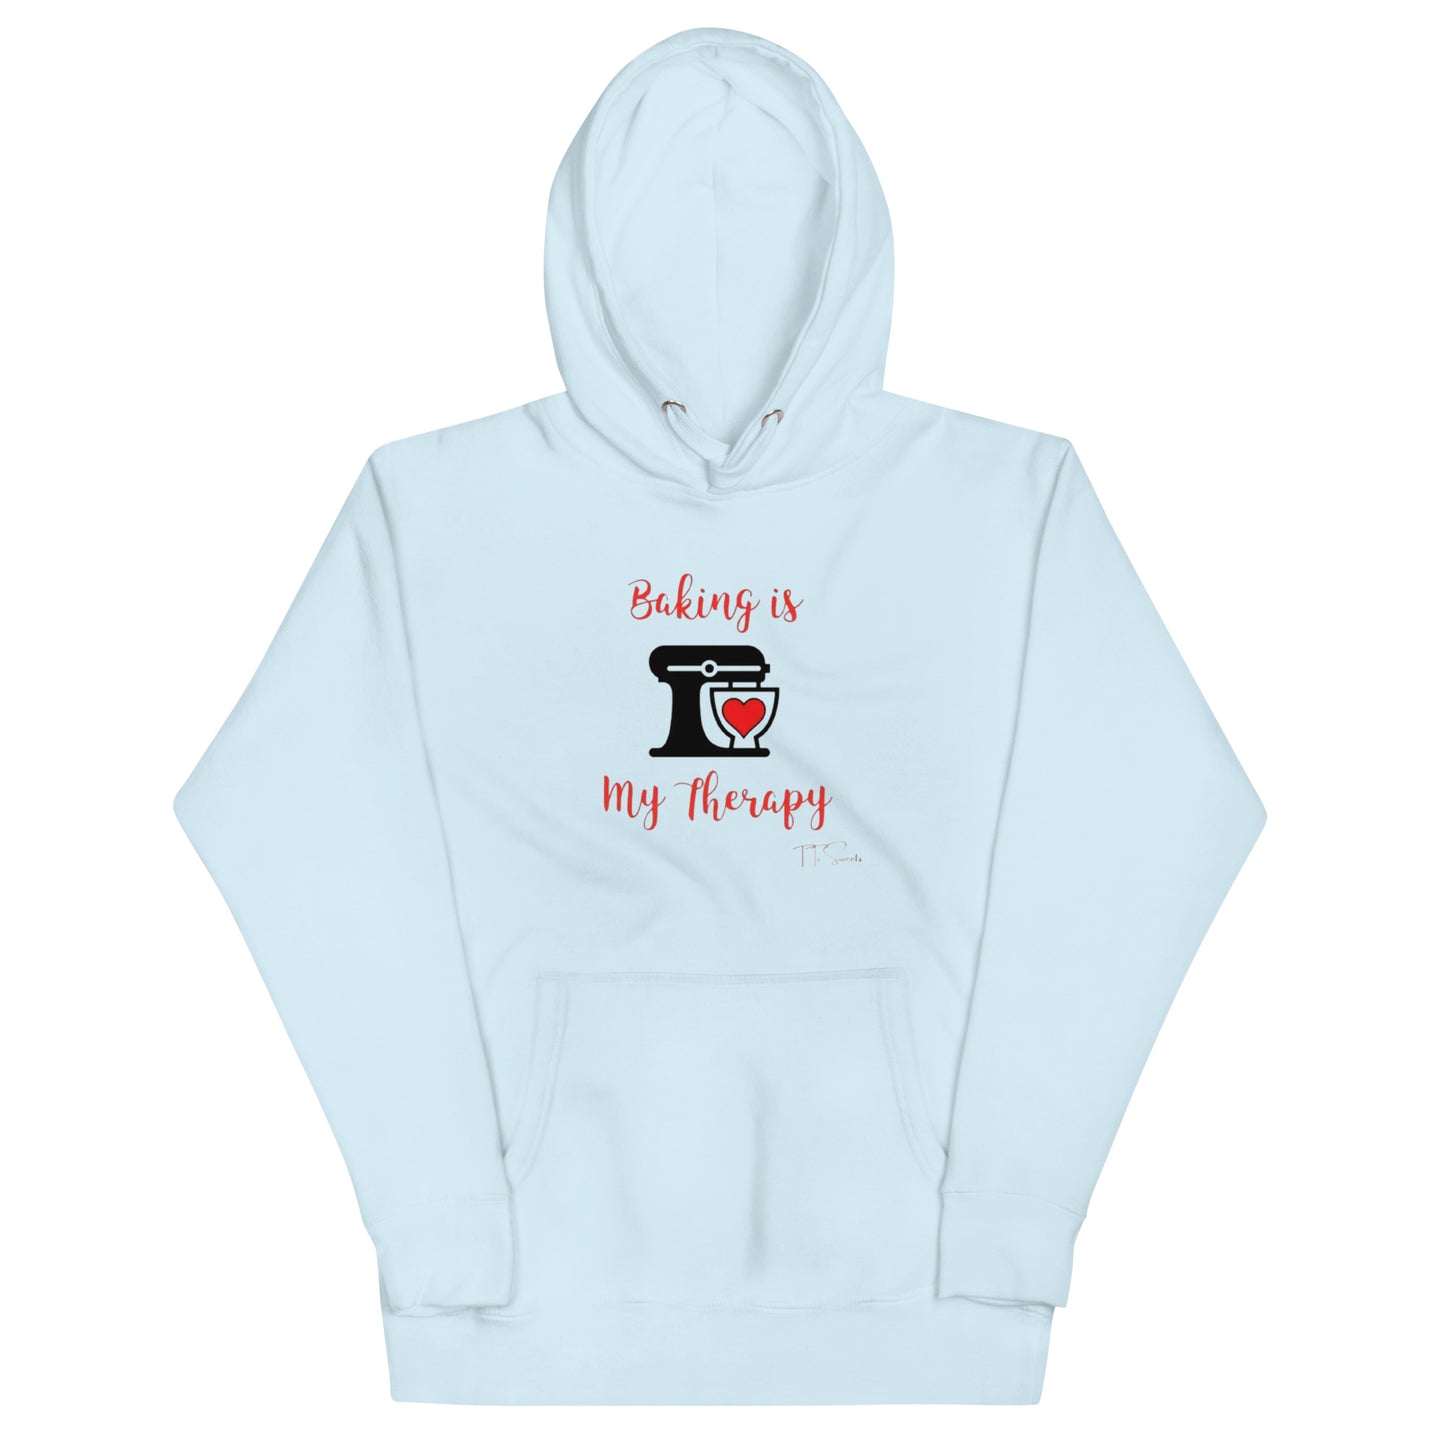 Baking is My Therapy Unisex Hoodie